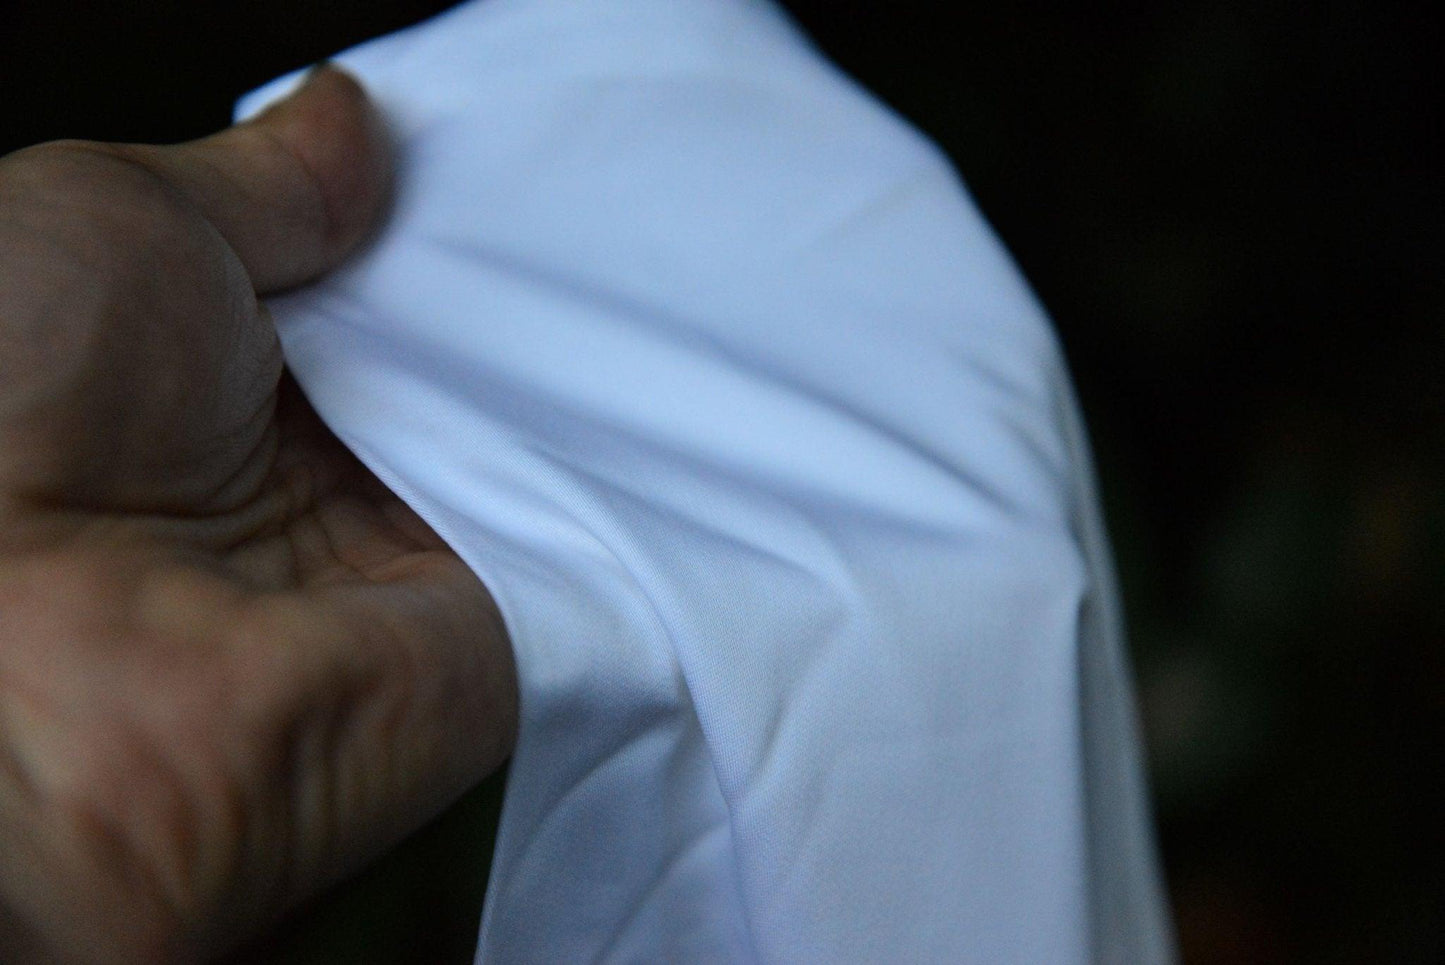 Close up of bamboo fabric in hand. It looks incredibly soft and smooth.